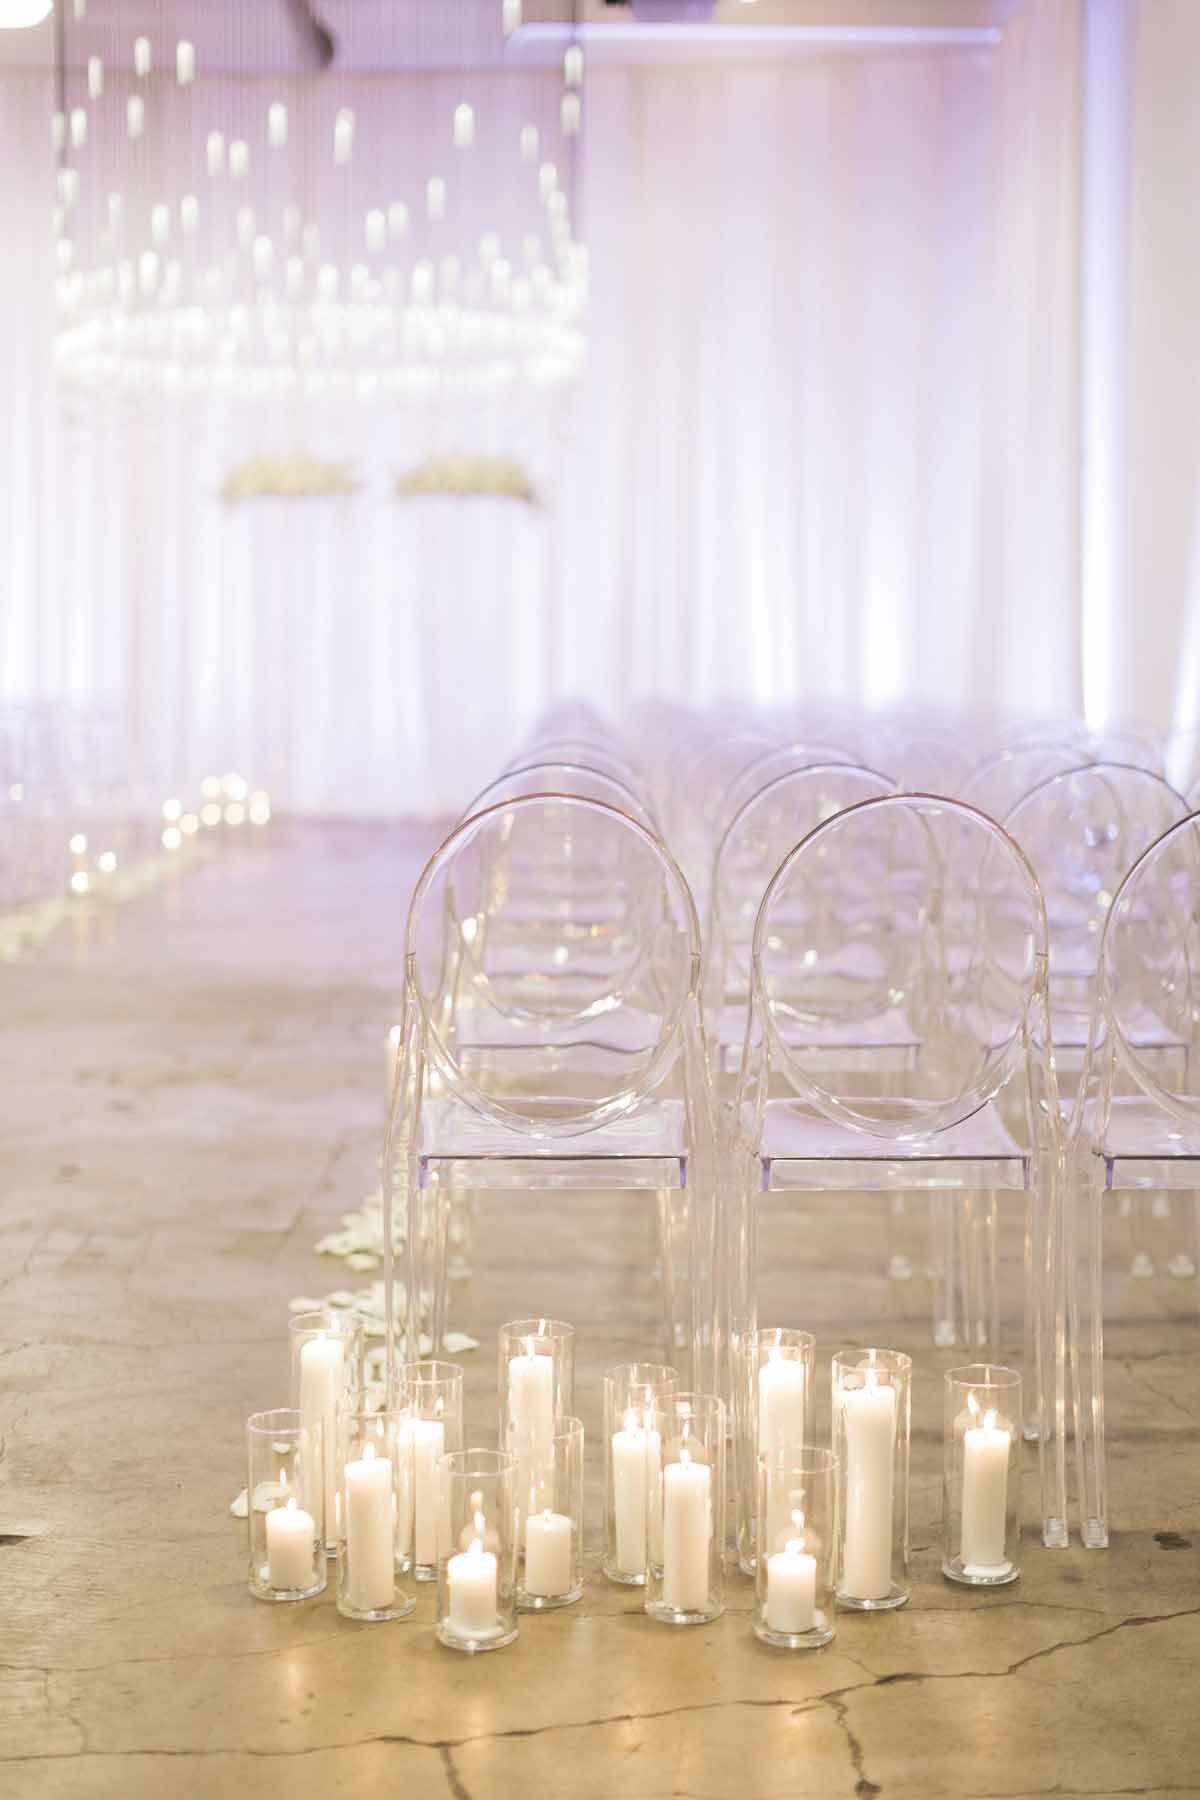 What a dreamy ethereal white candlelit wedding ceremony